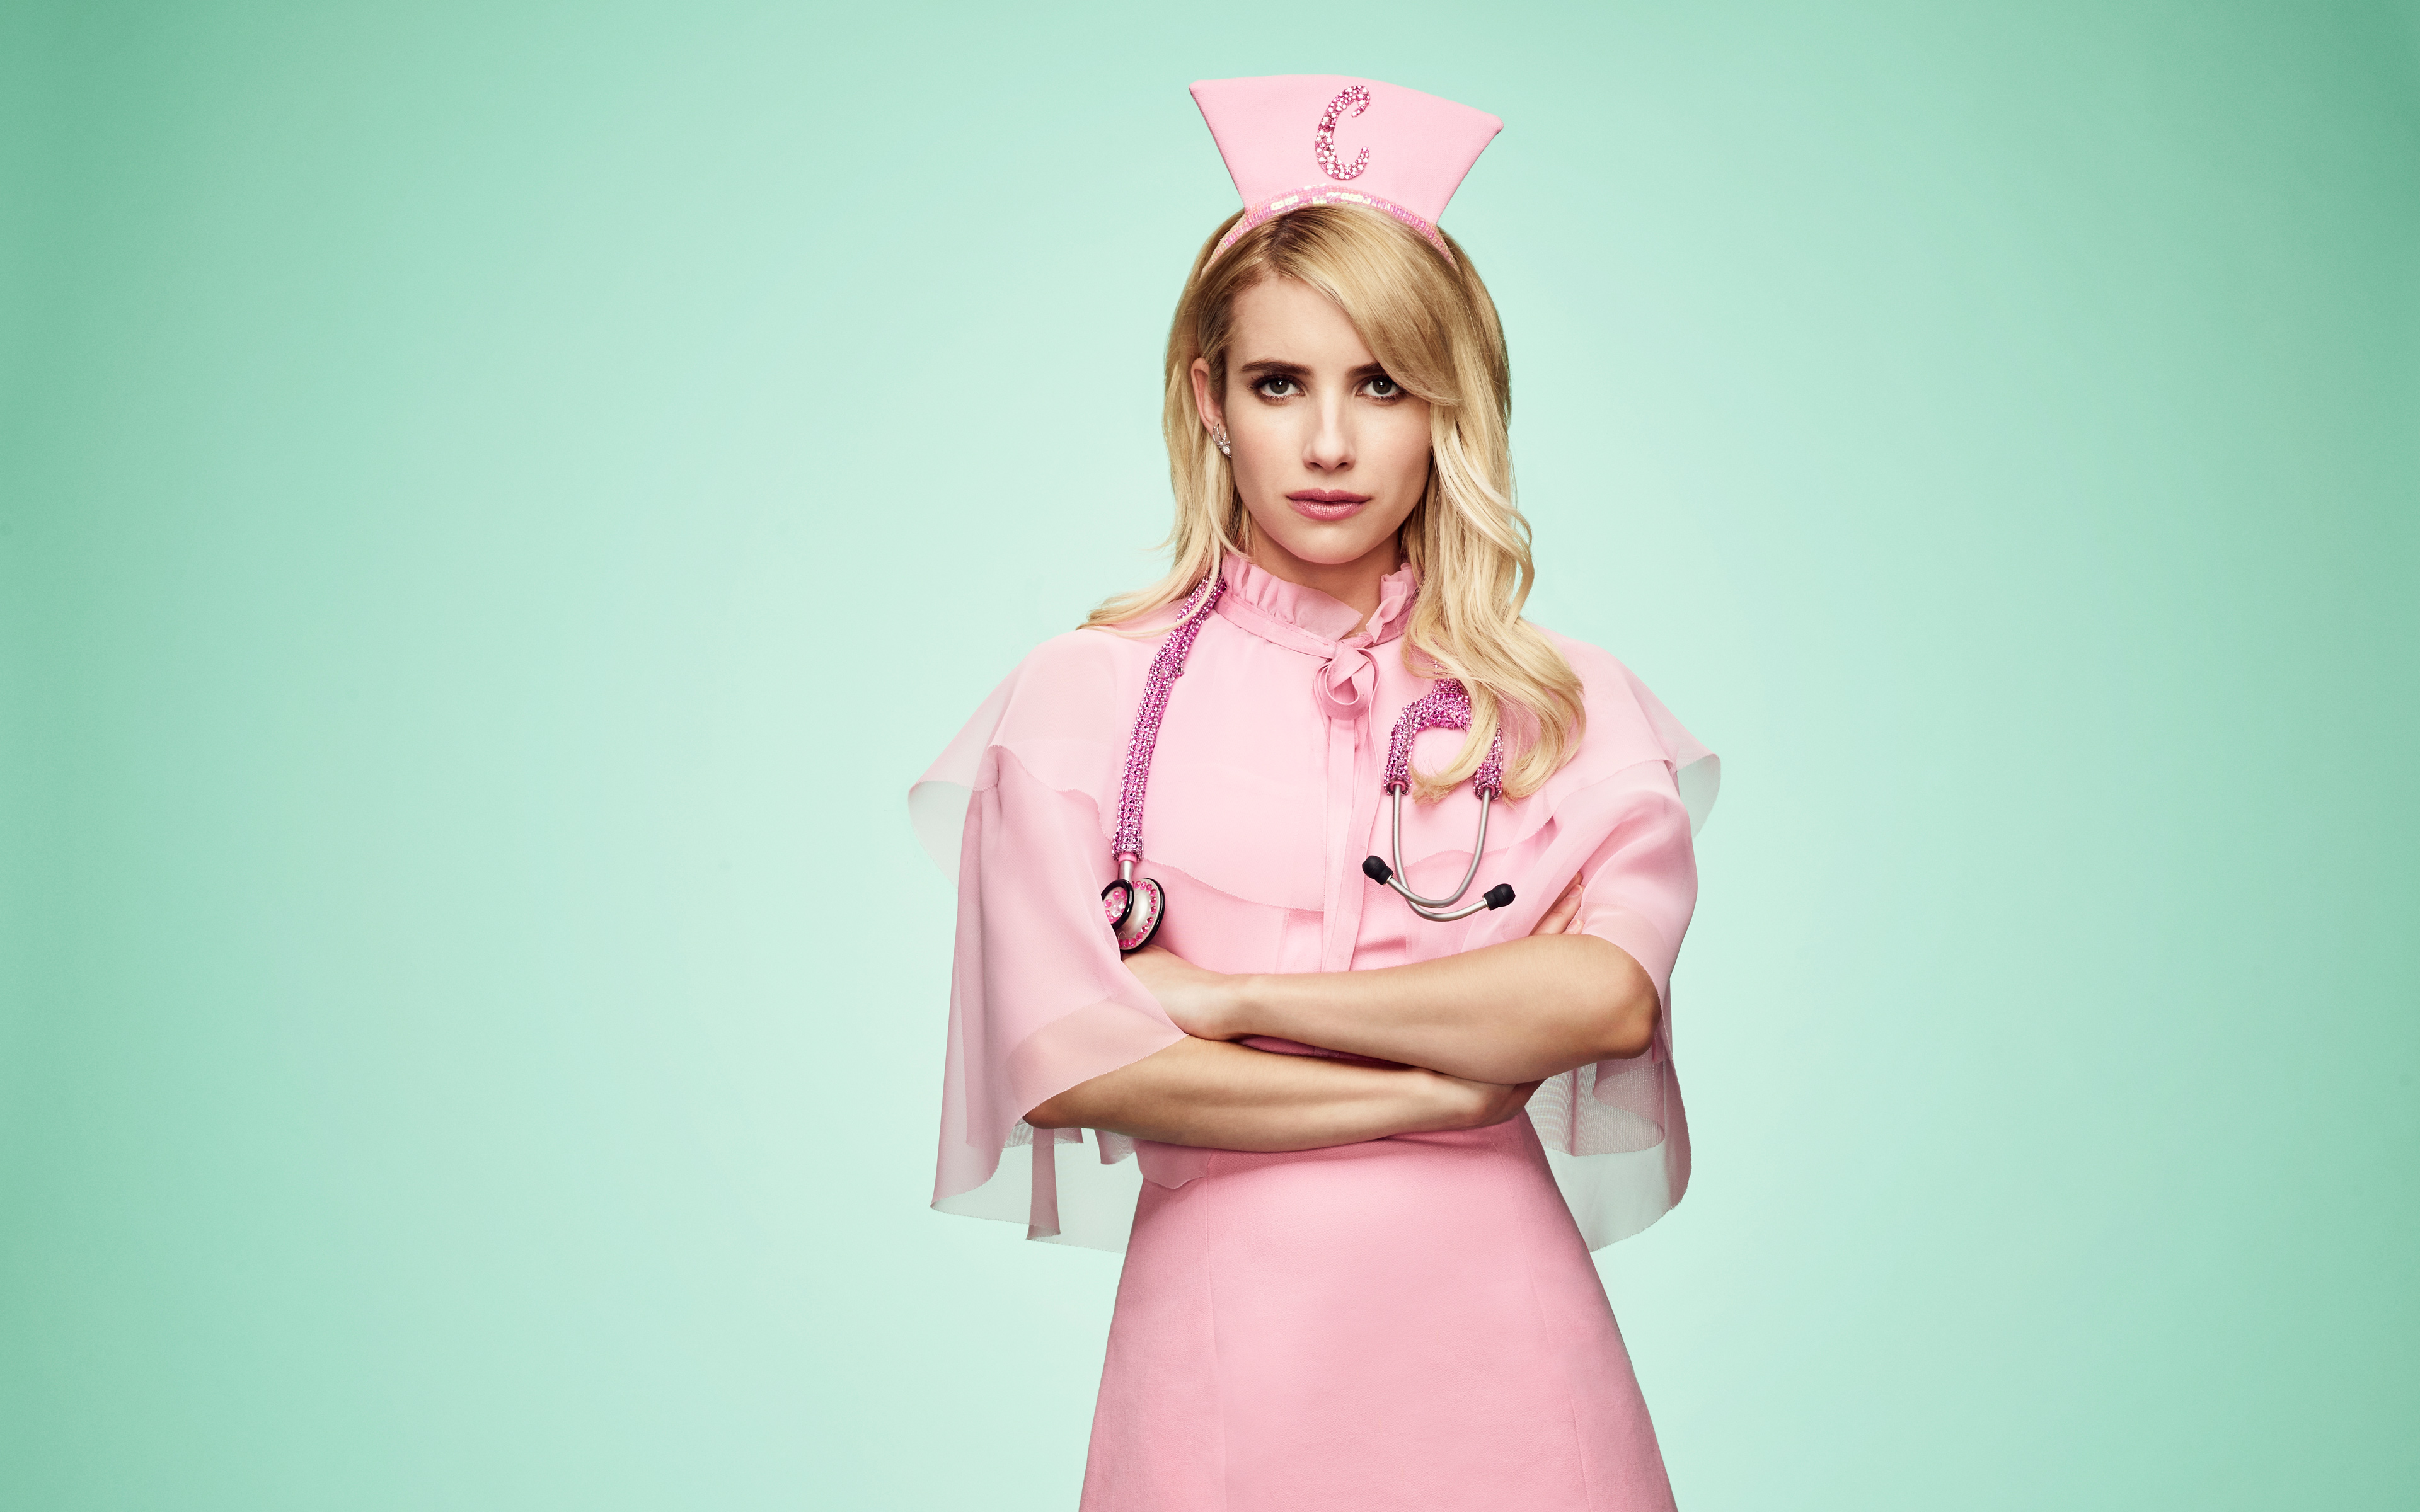 People 3840x2400 Emma Roberts actress simple background blonde women women indoors indoors studio gradient green background arms crossed pink clothing nurses nurse outfit lipstick eyeliner dyed hair long hair standing stethoscope American women